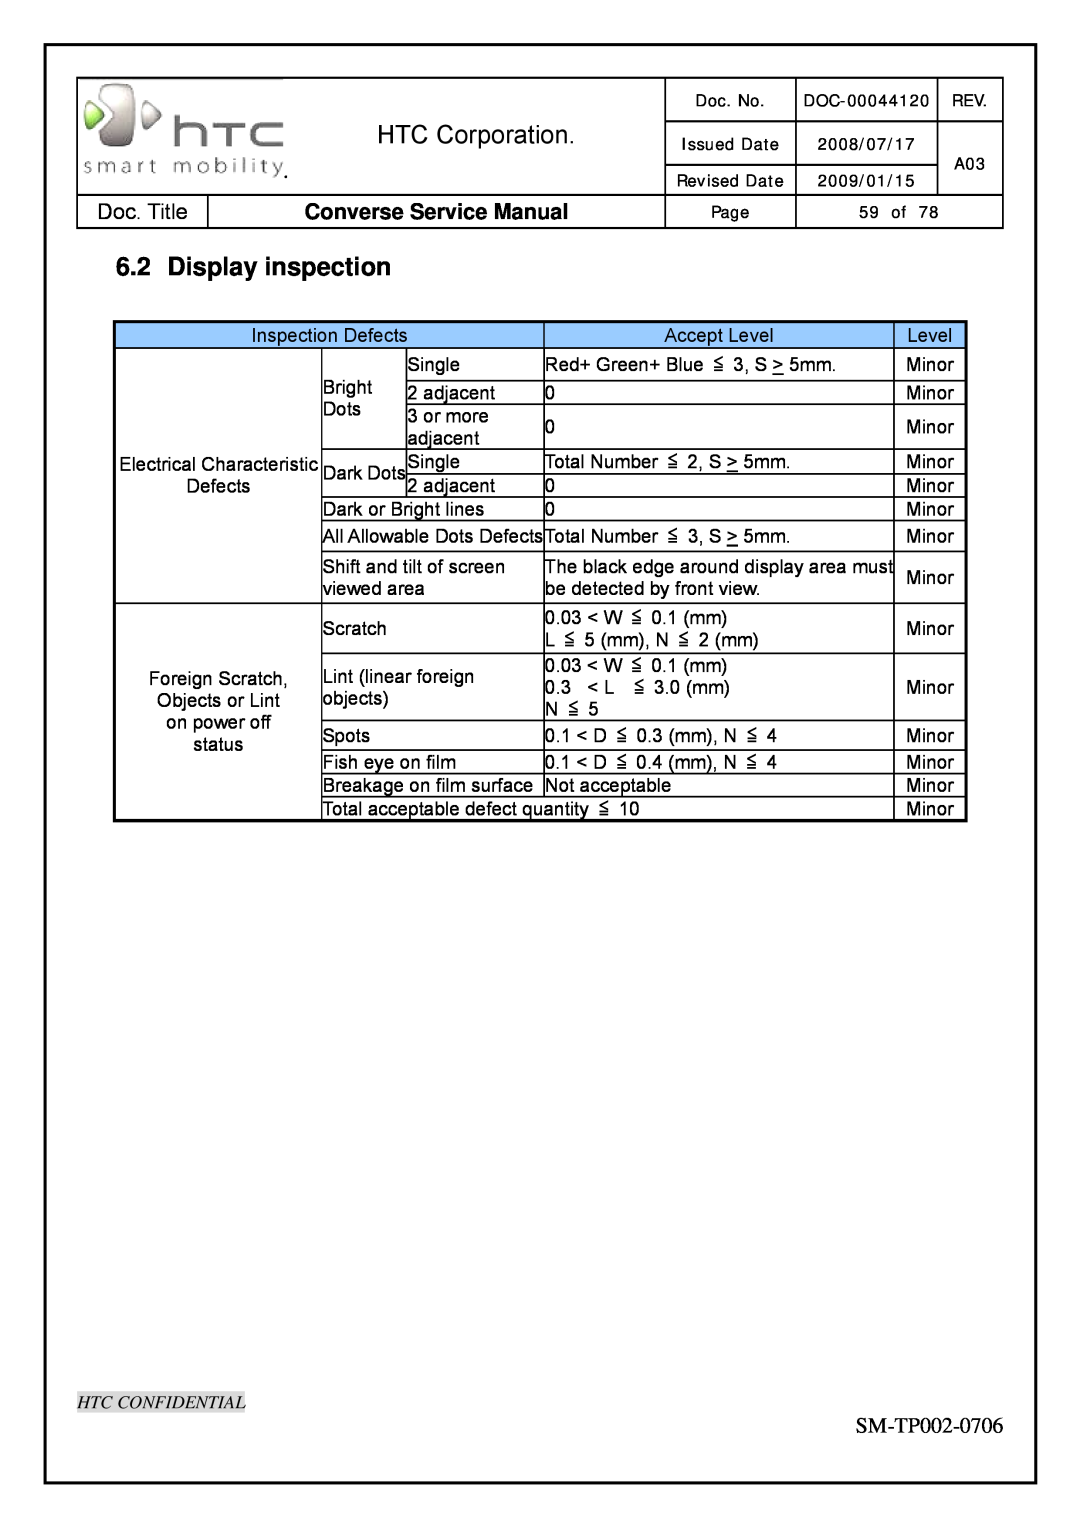 HTC SM-TP002-0706 Display inspection, HTC Corporation, Converse Service Manual, Dark Dots, Defects, Foreign Scratch 